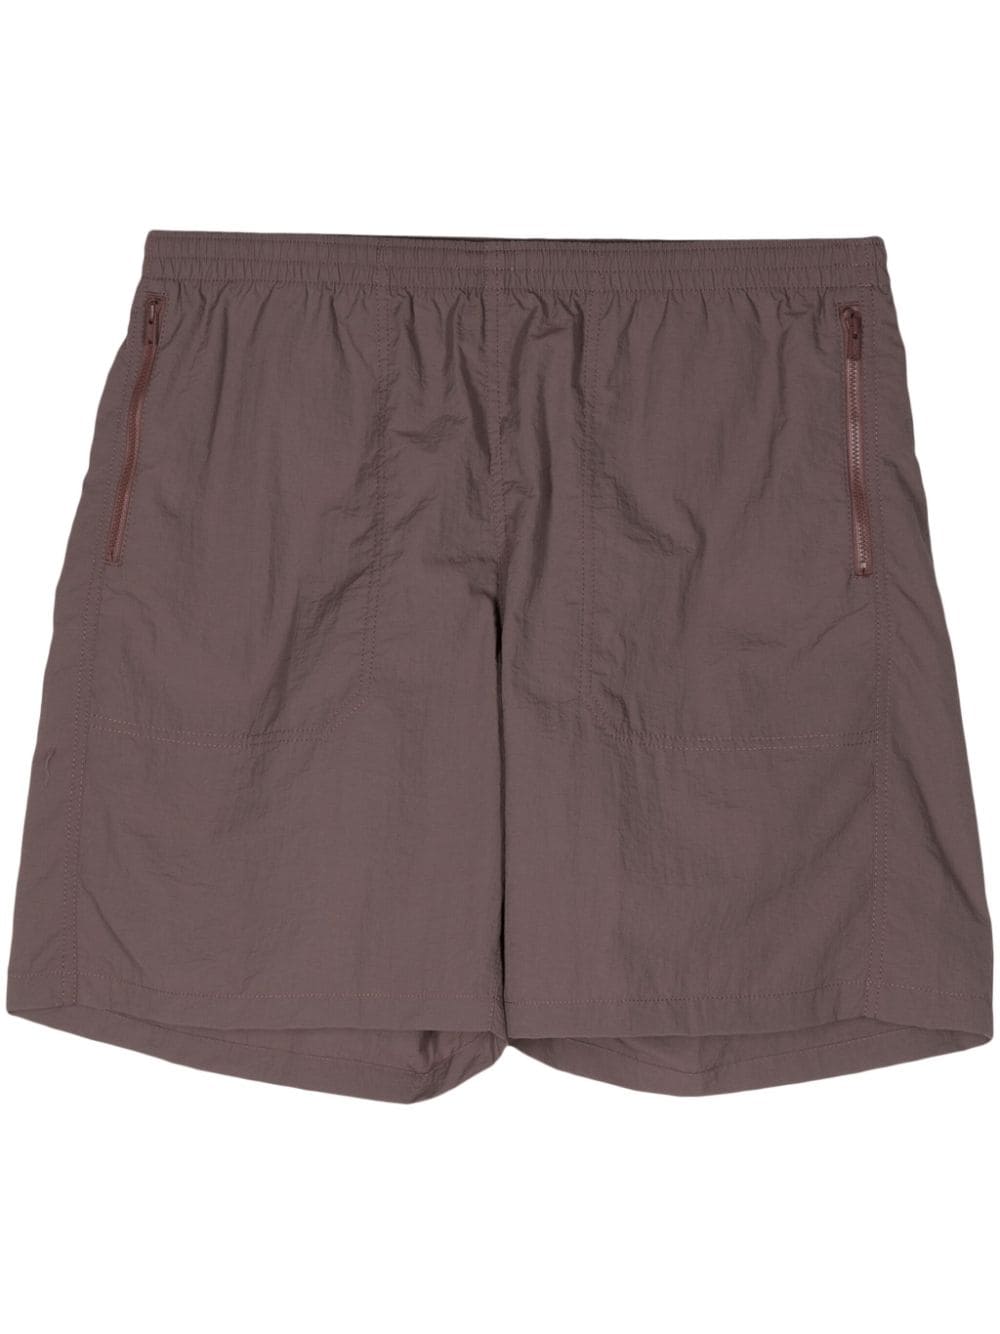 Undercover Crease Effect Shorts In Burgundy